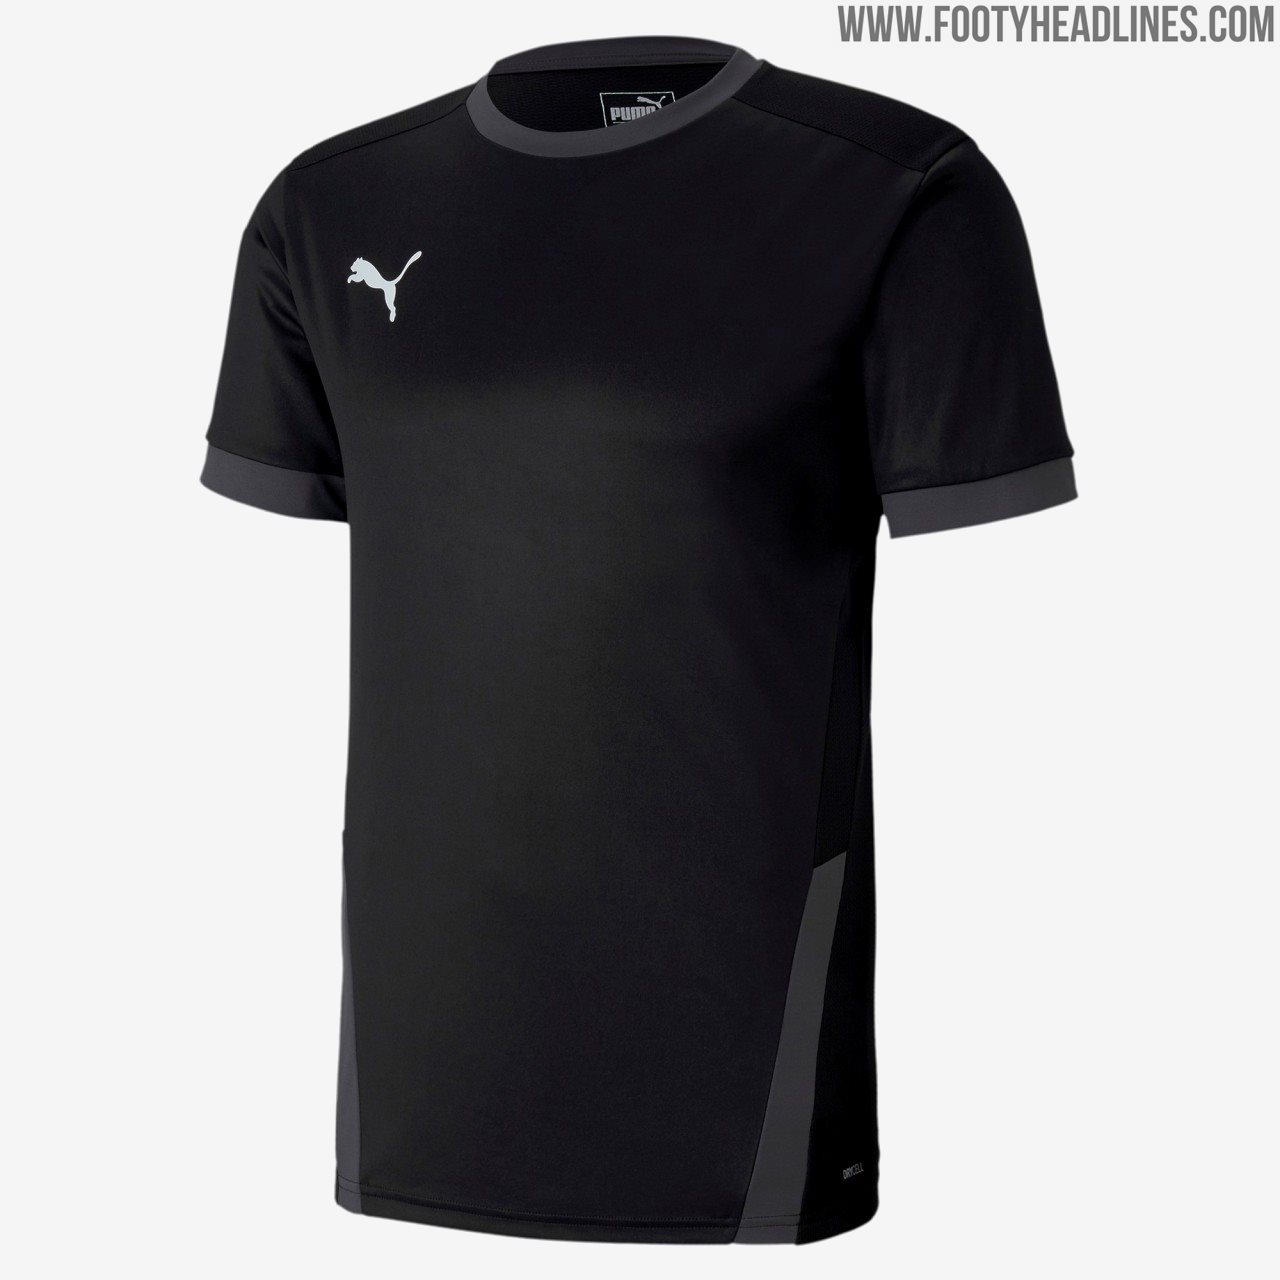 Full Puma 2020-21 Teamwear Kit Collection Revealed - 10 Different Kits ...